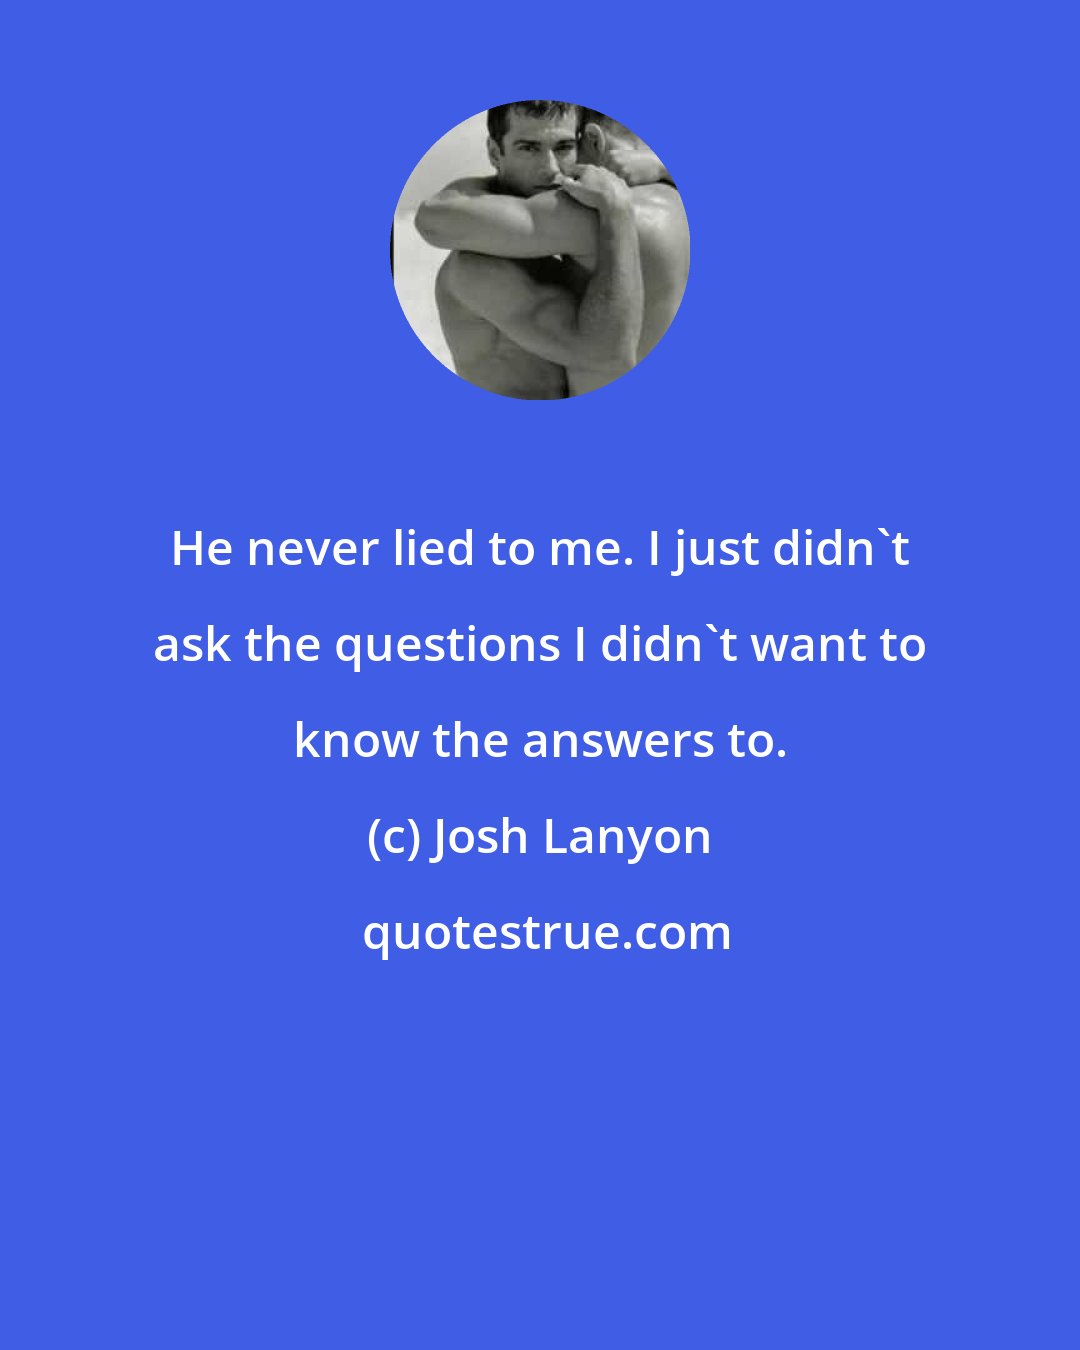 Josh Lanyon: He never lied to me. I just didn't ask the questions I didn't want to know the answers to.